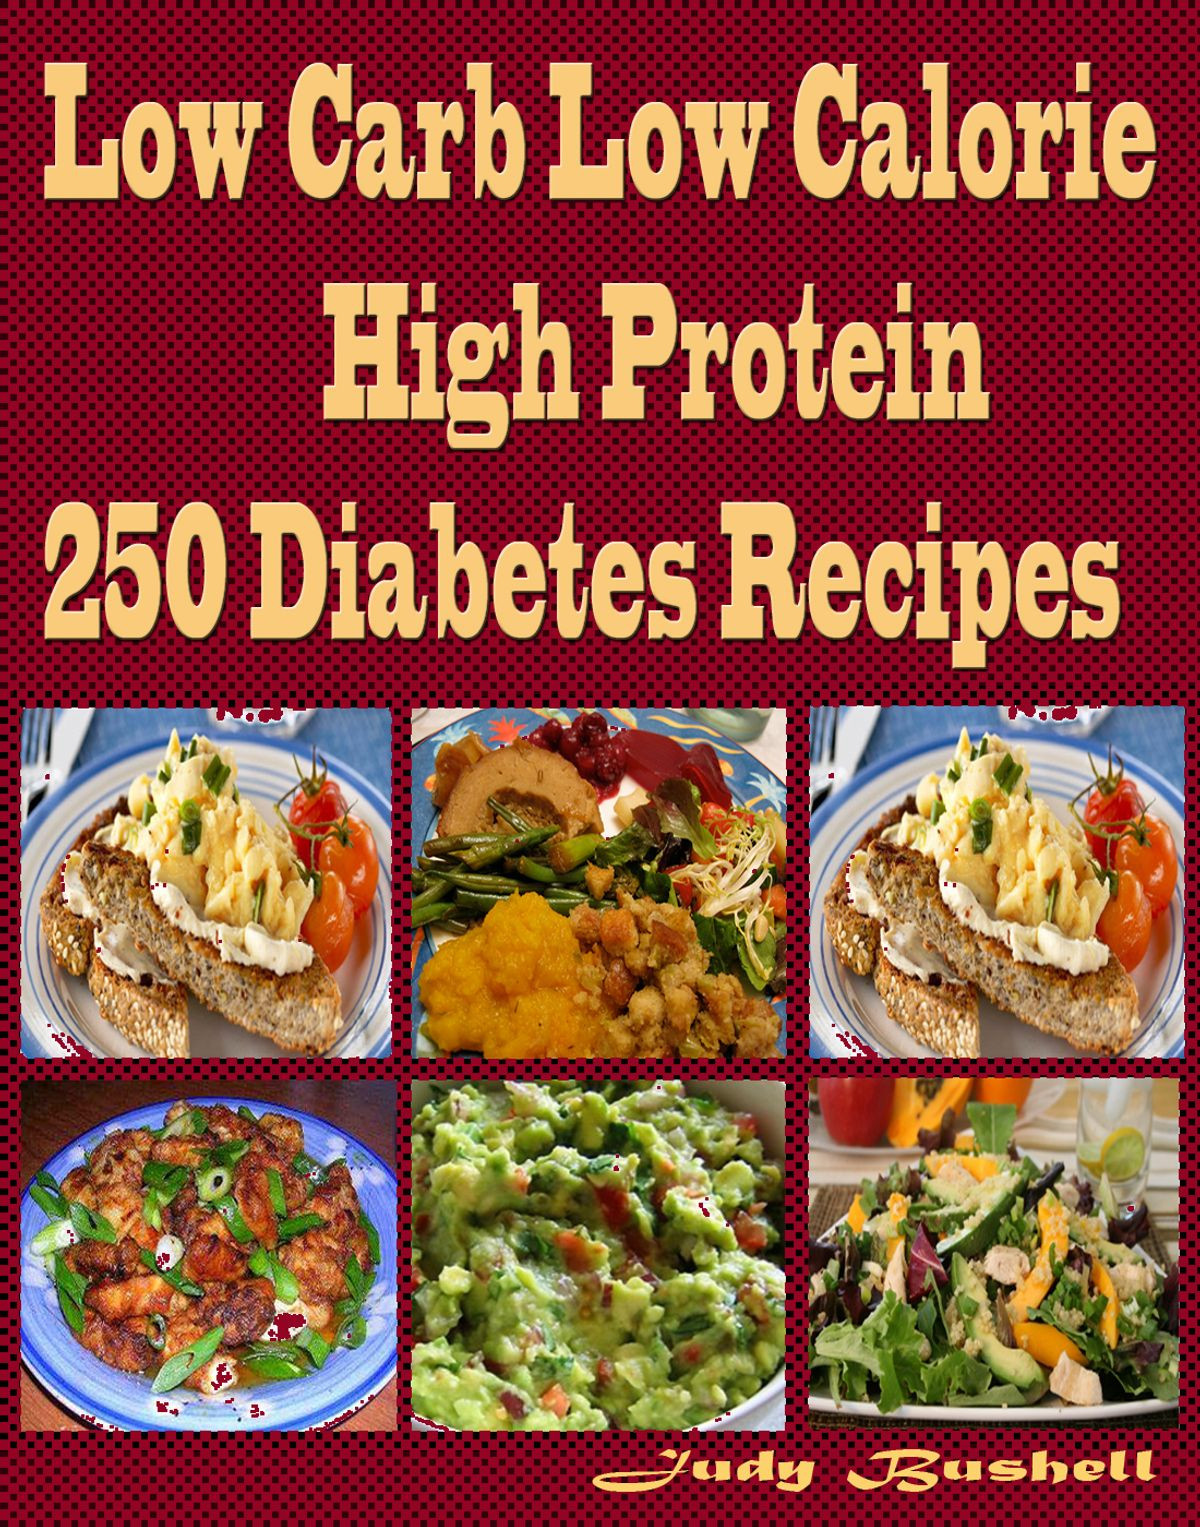 Low Calorie High Protein Recipes
 Low Carb Low Calorie High Protein 250 Diabetes Recipes